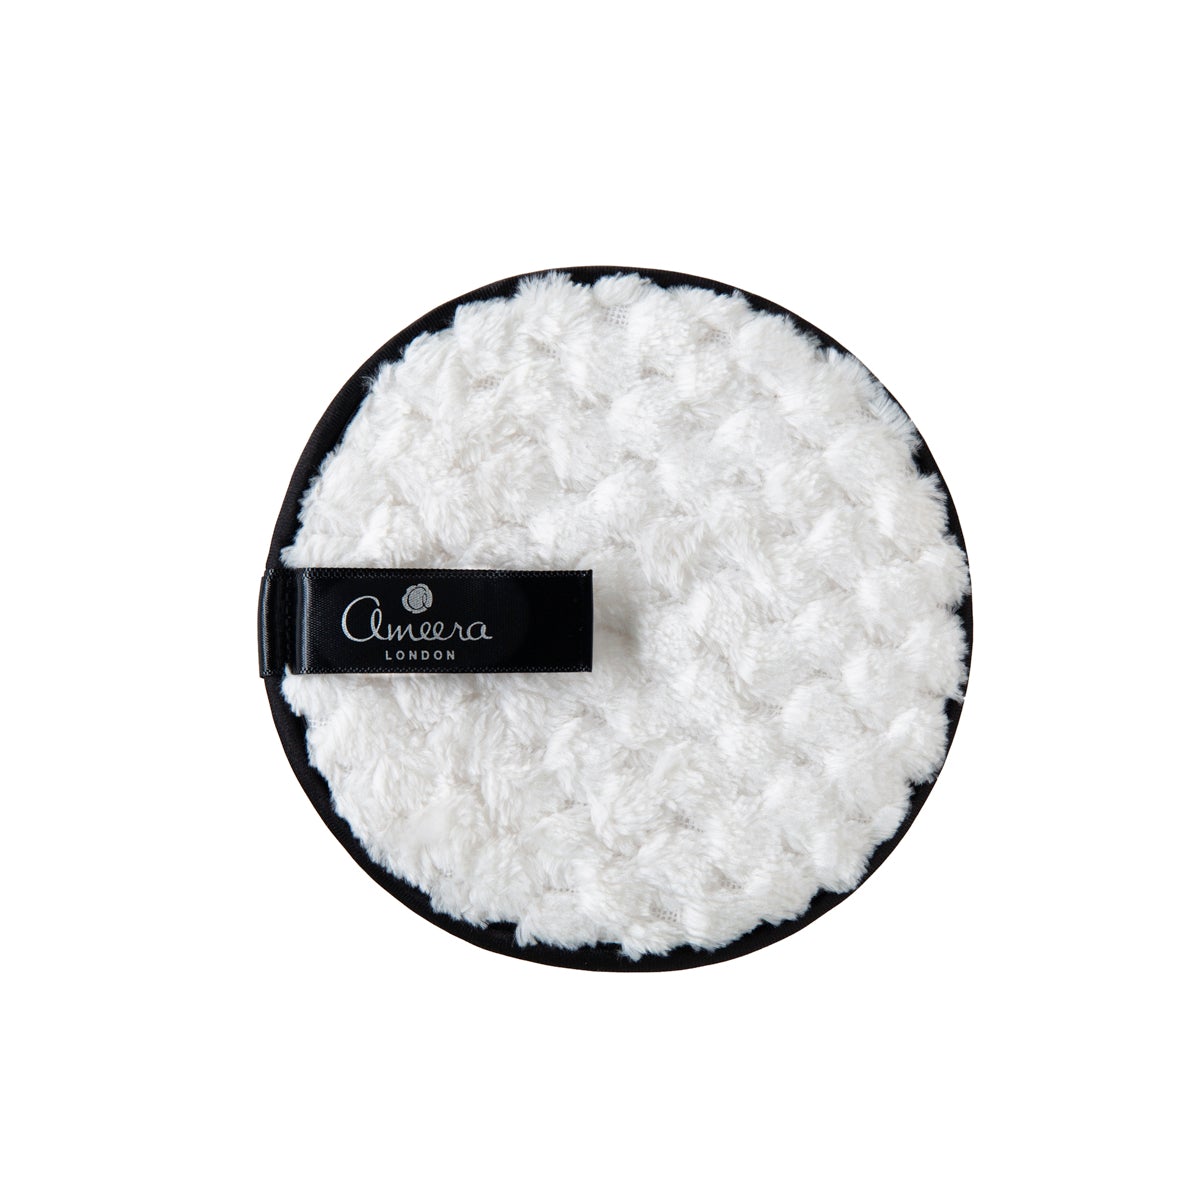 Ameera London's makeup remover pad quickly and easily removes makeup, with It's micro fiber cloth and some pure Rose water or our Liquid Gold pure Argan oil, or water only. It;s non-toxic , reusable and alternative source to wipes. It replaces up to 500 single-use makeup wipes.No need to scrub or rub, our makeup remover pad is perfect for sensitive and Blemish-prone skin.